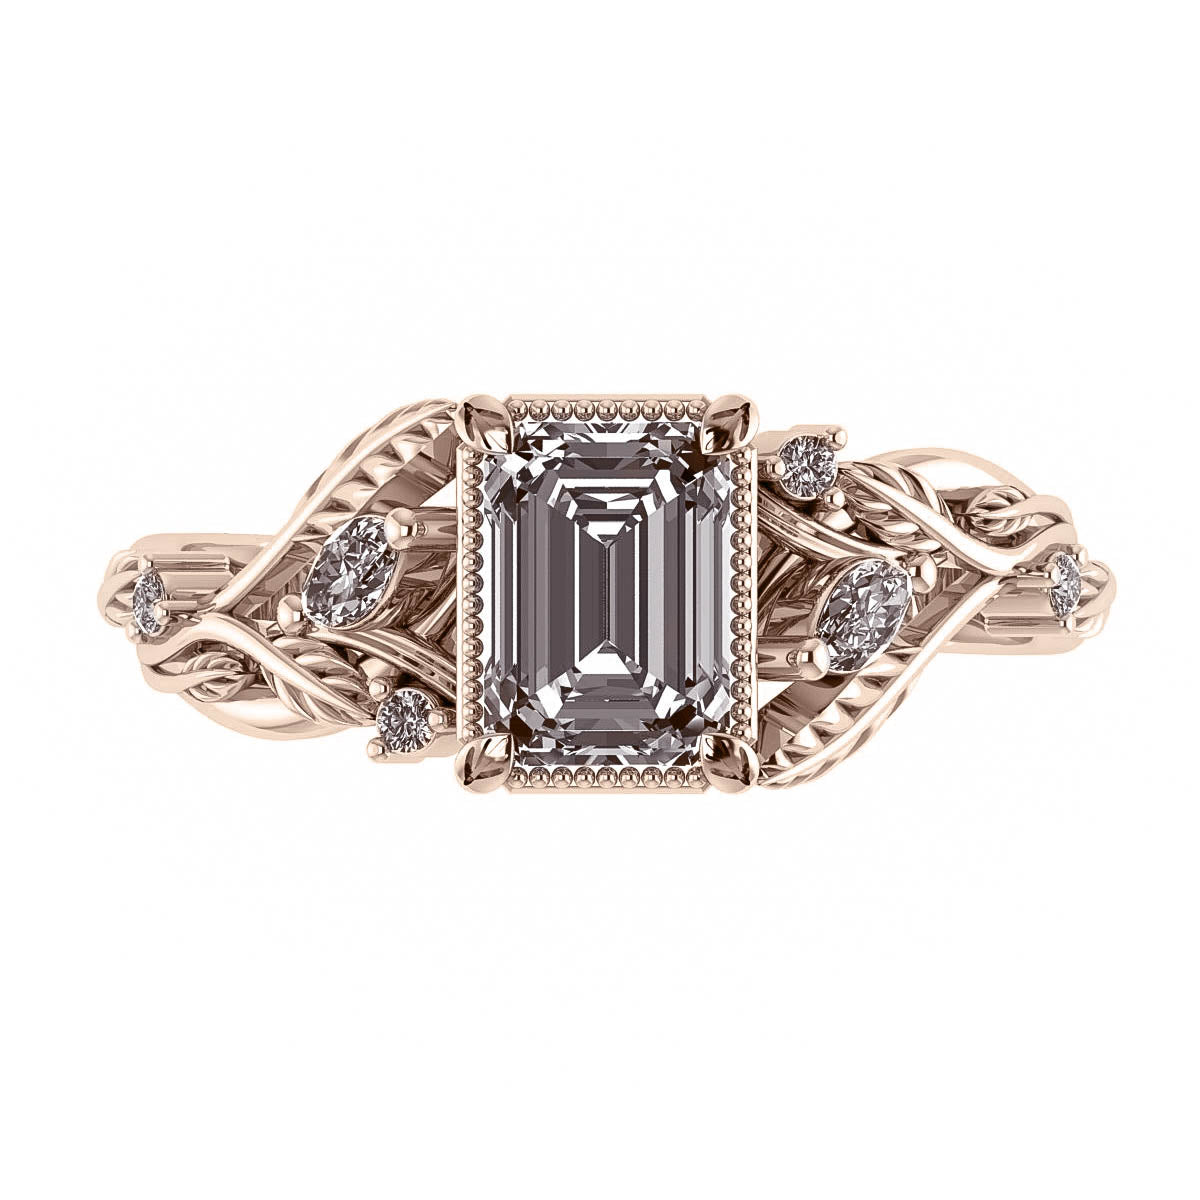 Patricia asymmetric | engagement ring setting with emerald cut gemstone 7x5 mm - Eden Garden Jewelry™